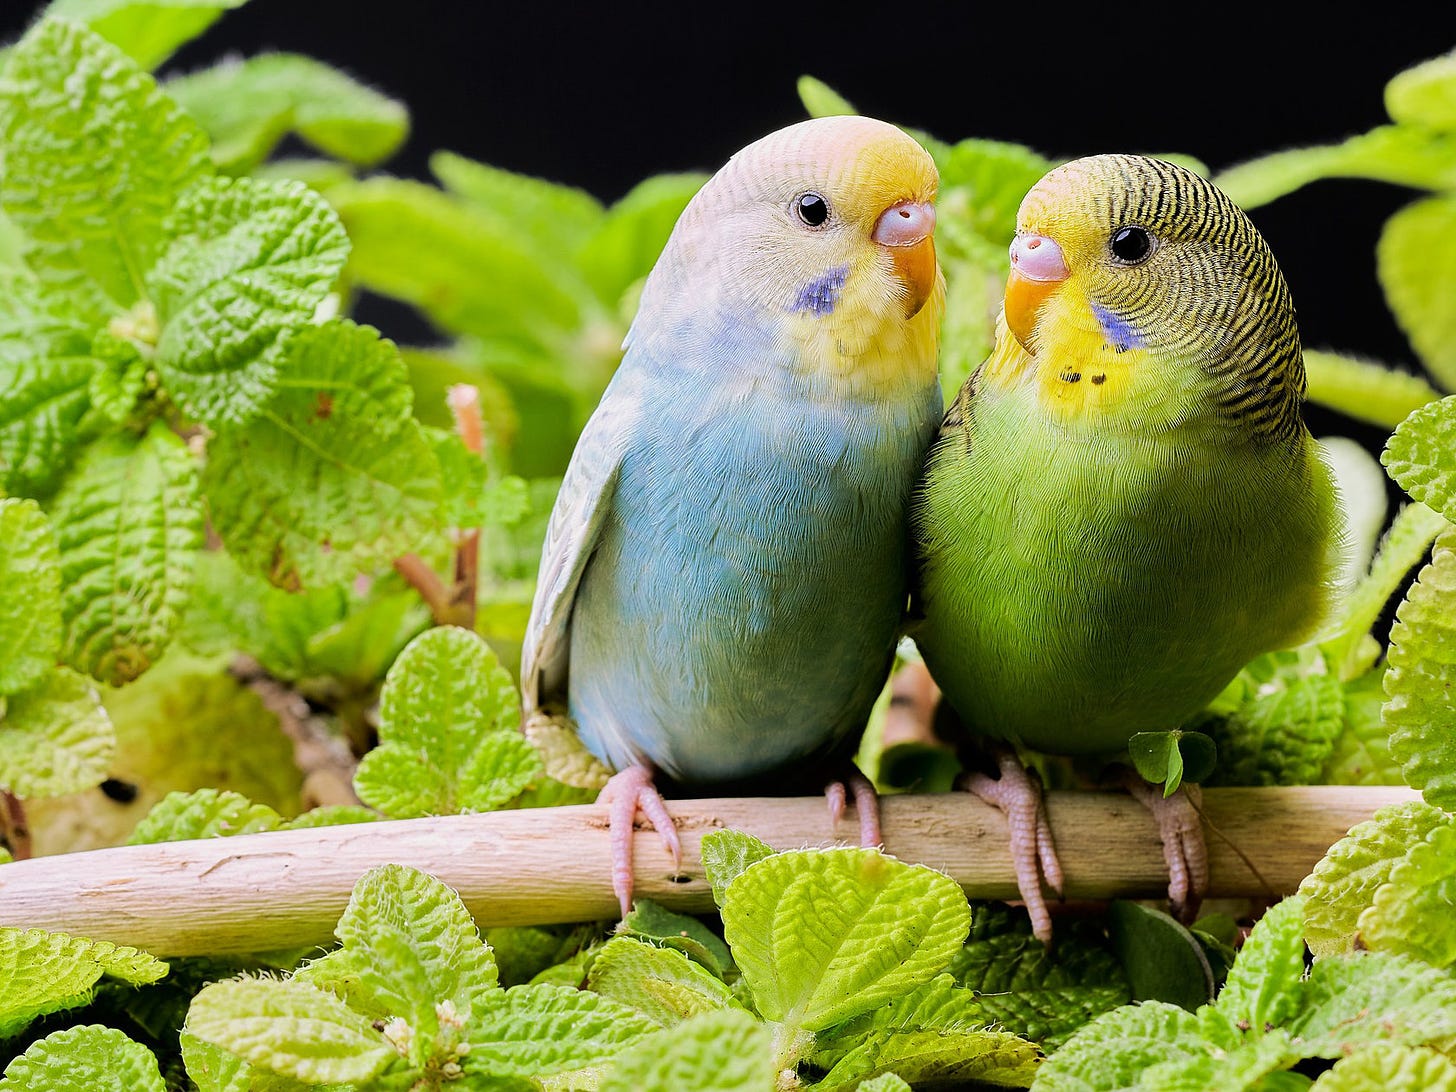 Two young budgerigars perch side by side on a peeled branch. The right budgie is lime green-breasted with black-and-yellow head stripes; the left budgie is sky blue-breasted with faint grey-and-white head stripes. Both have yellow face feathers with small periwinkle patches under the eyes, orange beaks, pink ceres, and pink feet. They are surrounded by leafy foliage, possibly mint, that is the same color as the green-breasted bird.